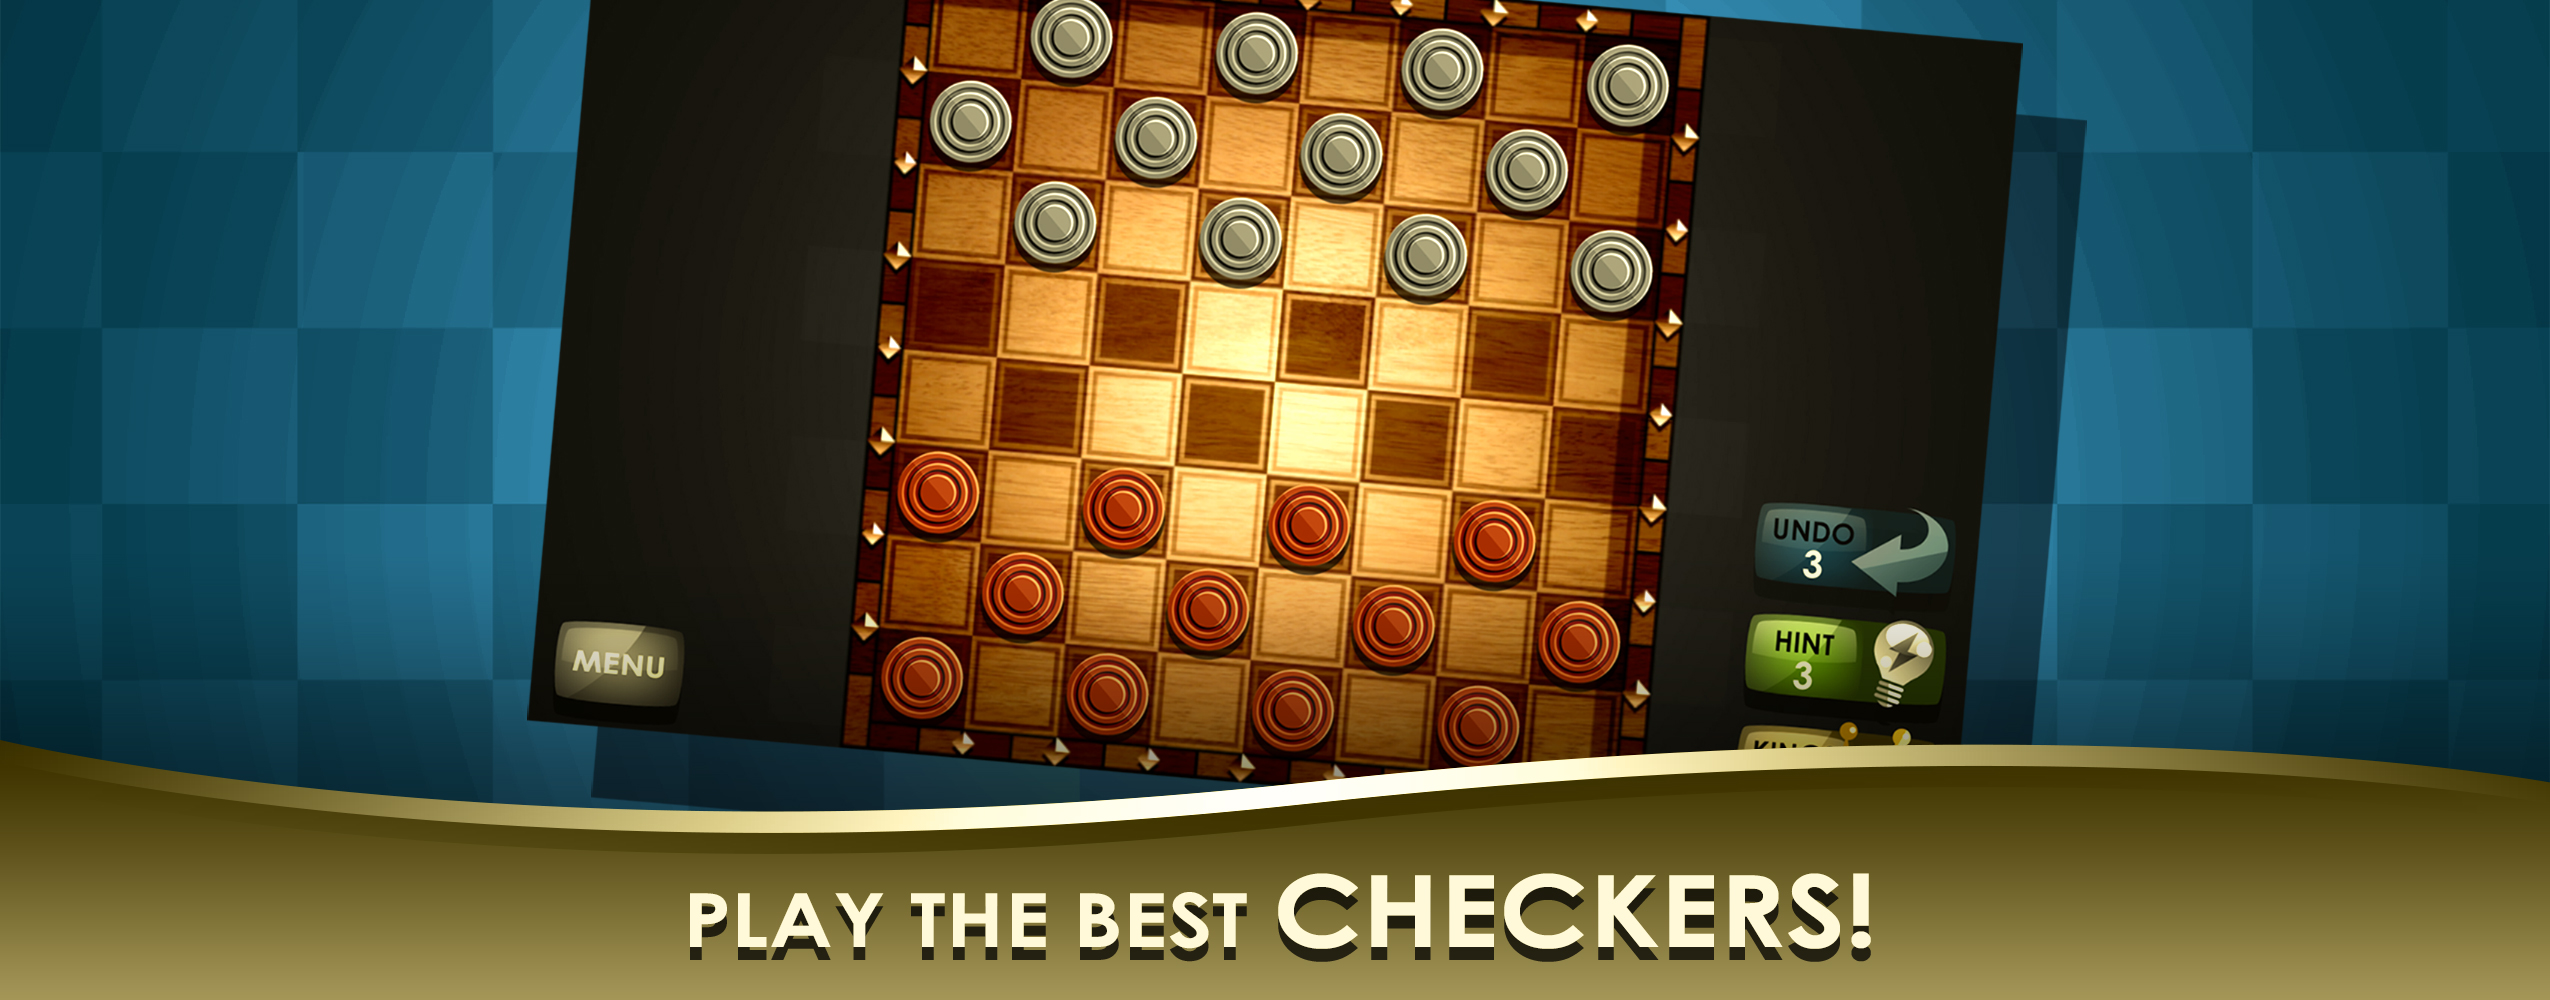 Checkers Royale!